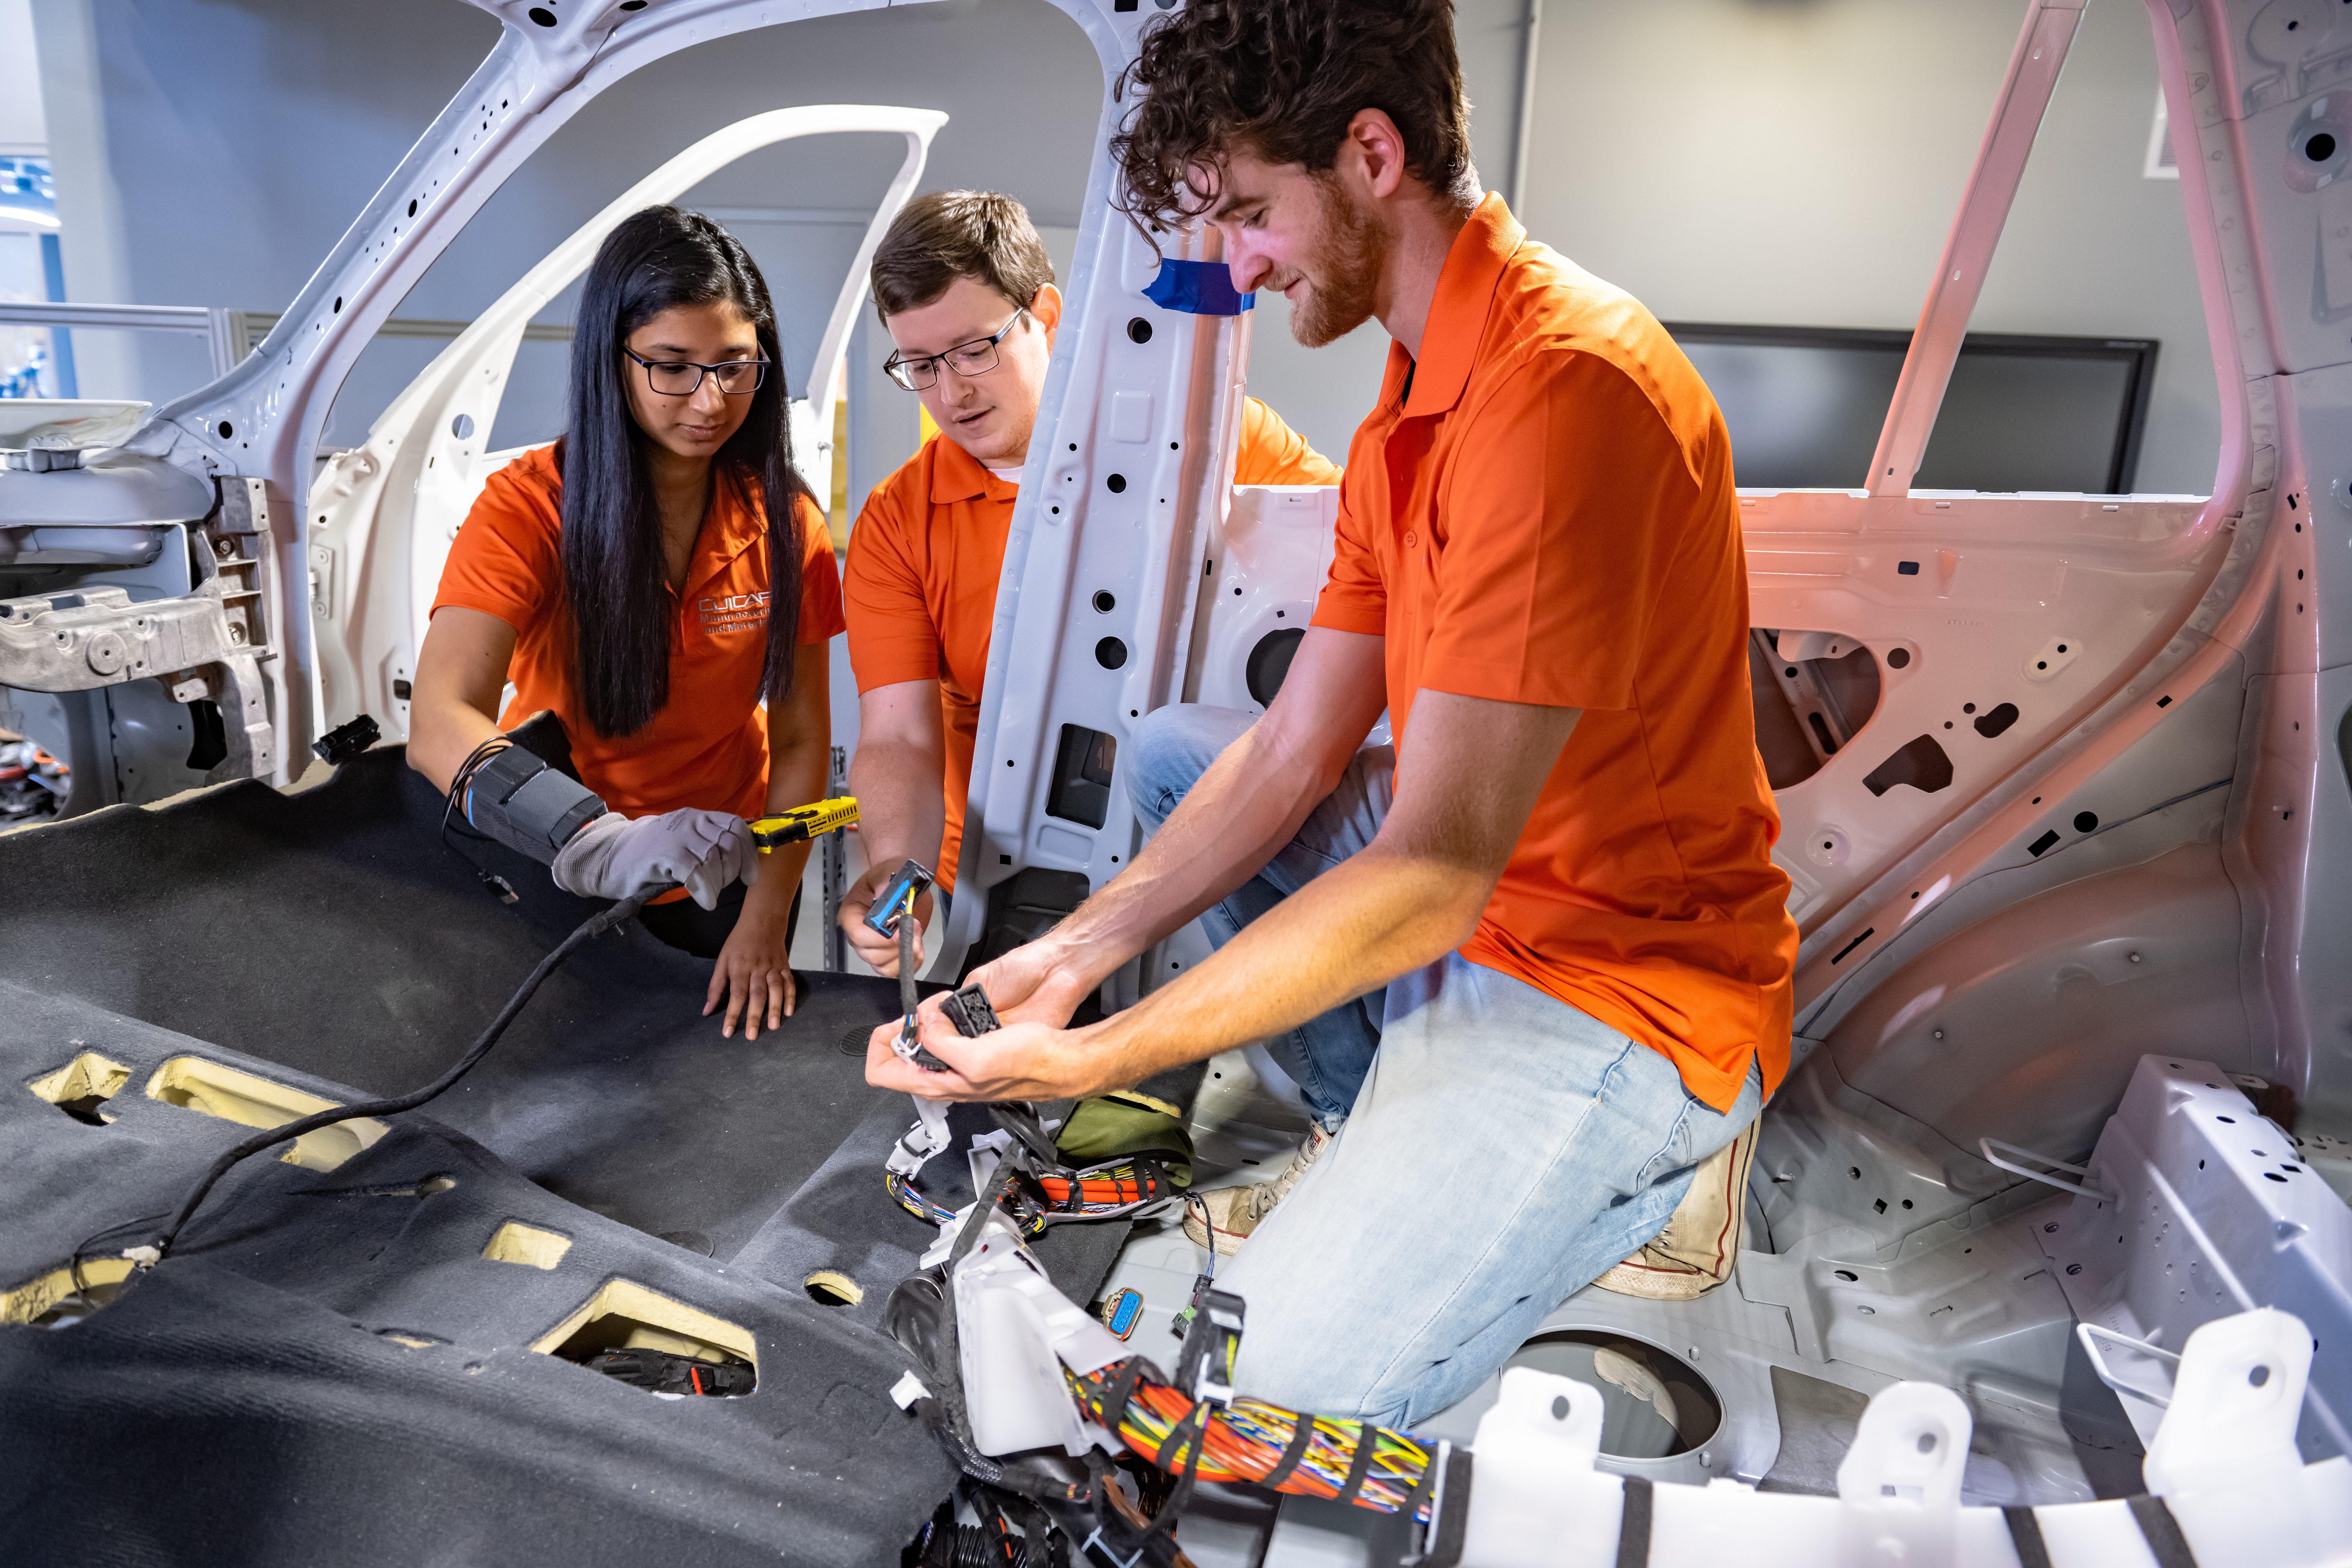 Two men and a women, all wearing orange, work on the inside of a vehicle's floorboard with hand-held tools.